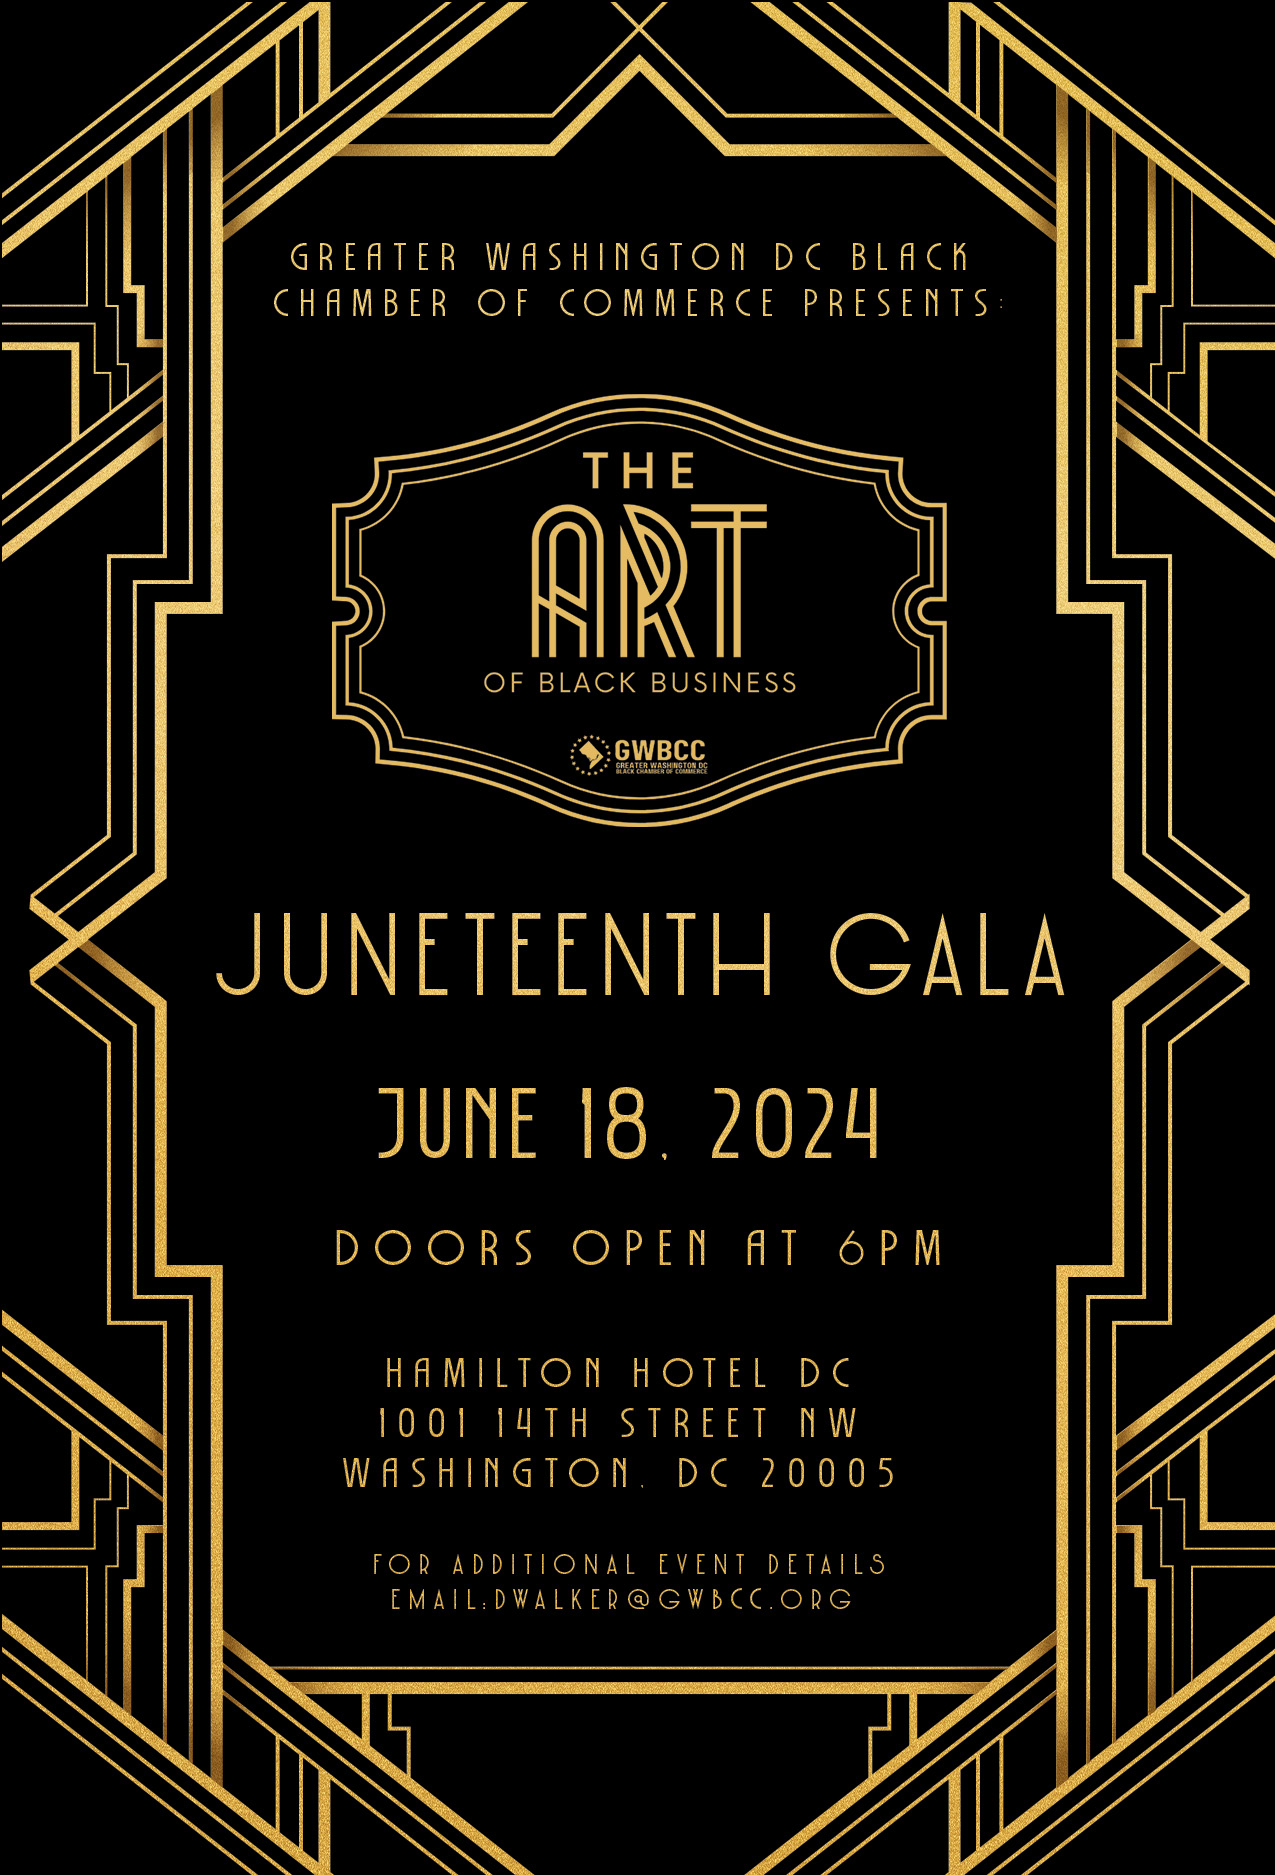 GWBCC Presents: The Art of Black Business Juneteenth Gala